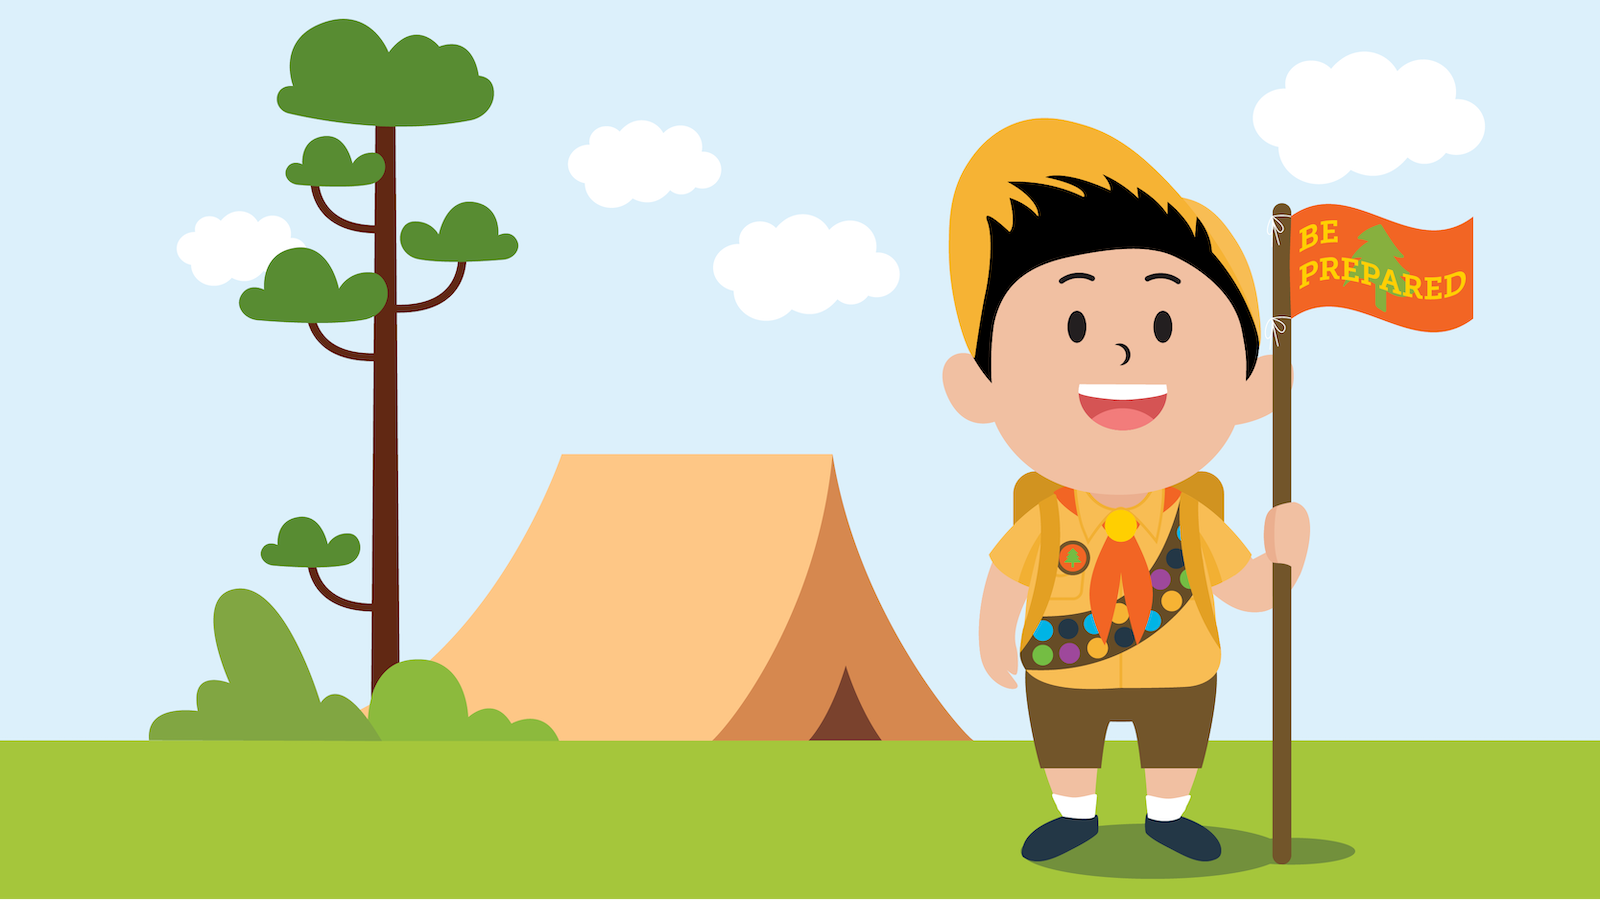 illustration of a young child camper staning in front of a tent outdoors.  Child holding a small flag that says be prepared and has a sash of badges across his chest. 